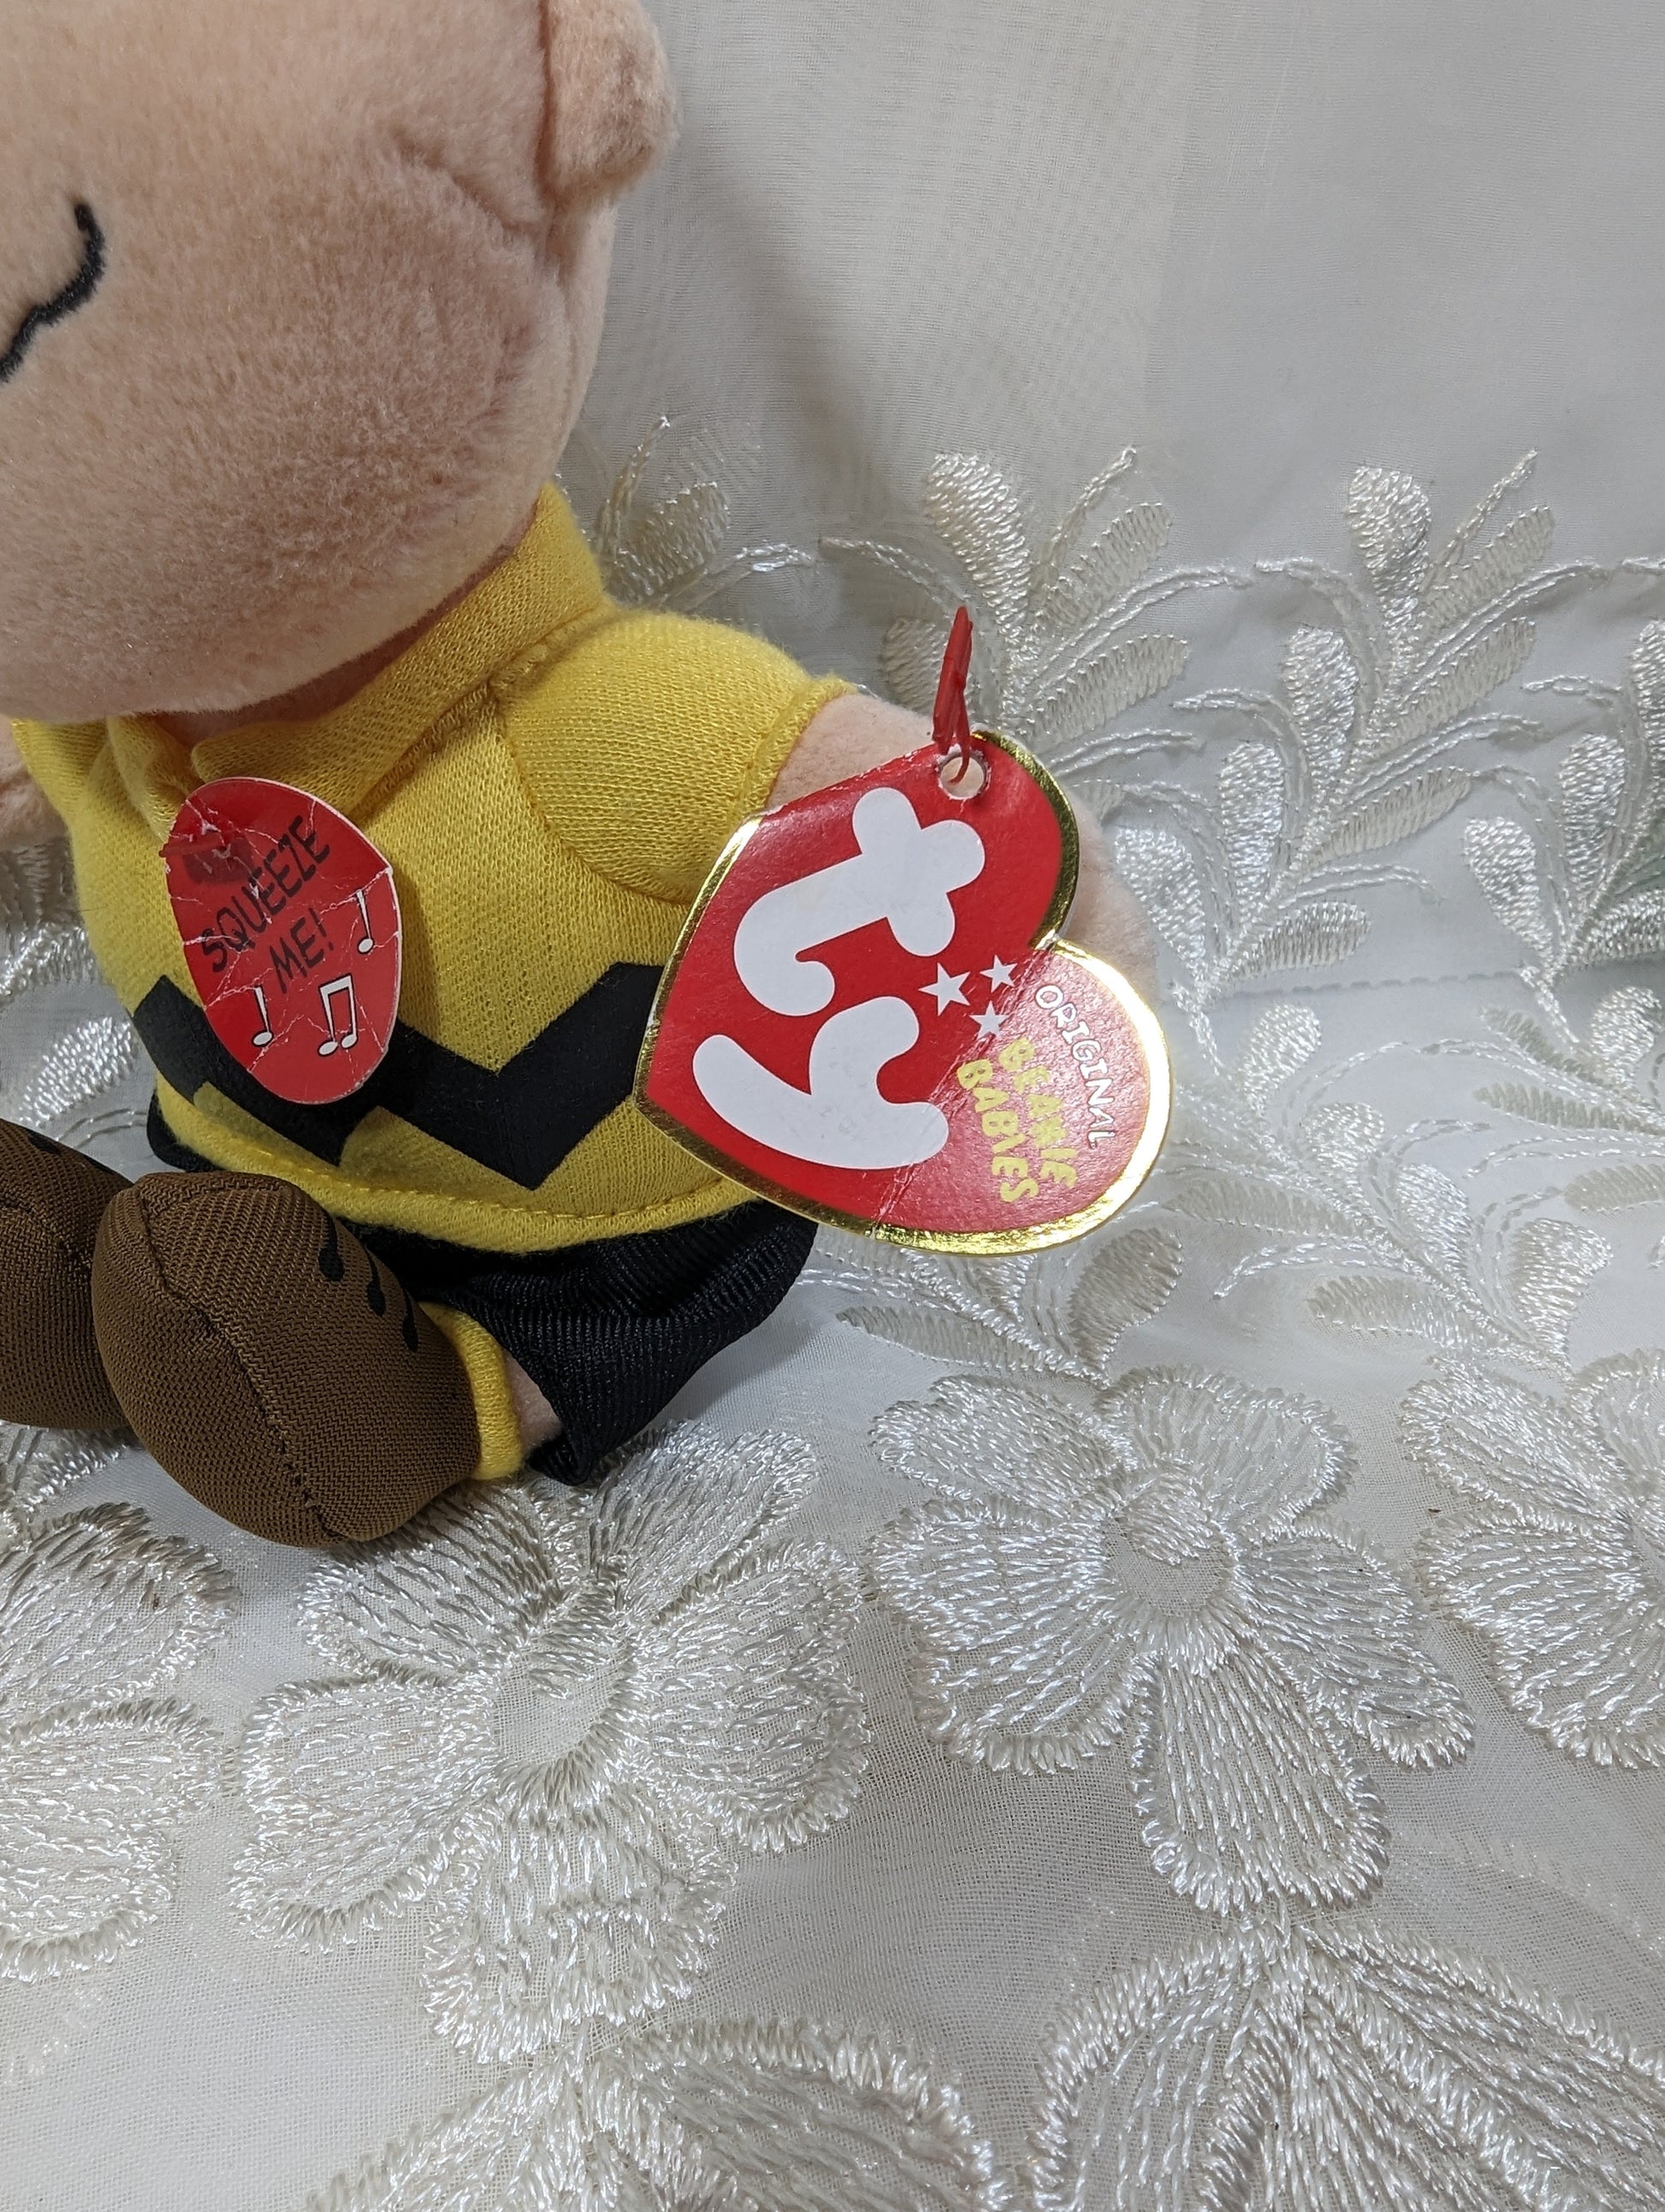 Ty Beanie Baby - Charlie Brown From The Peanuts (7in) Creased Tag, No Sound - Vintage Beanies Canada